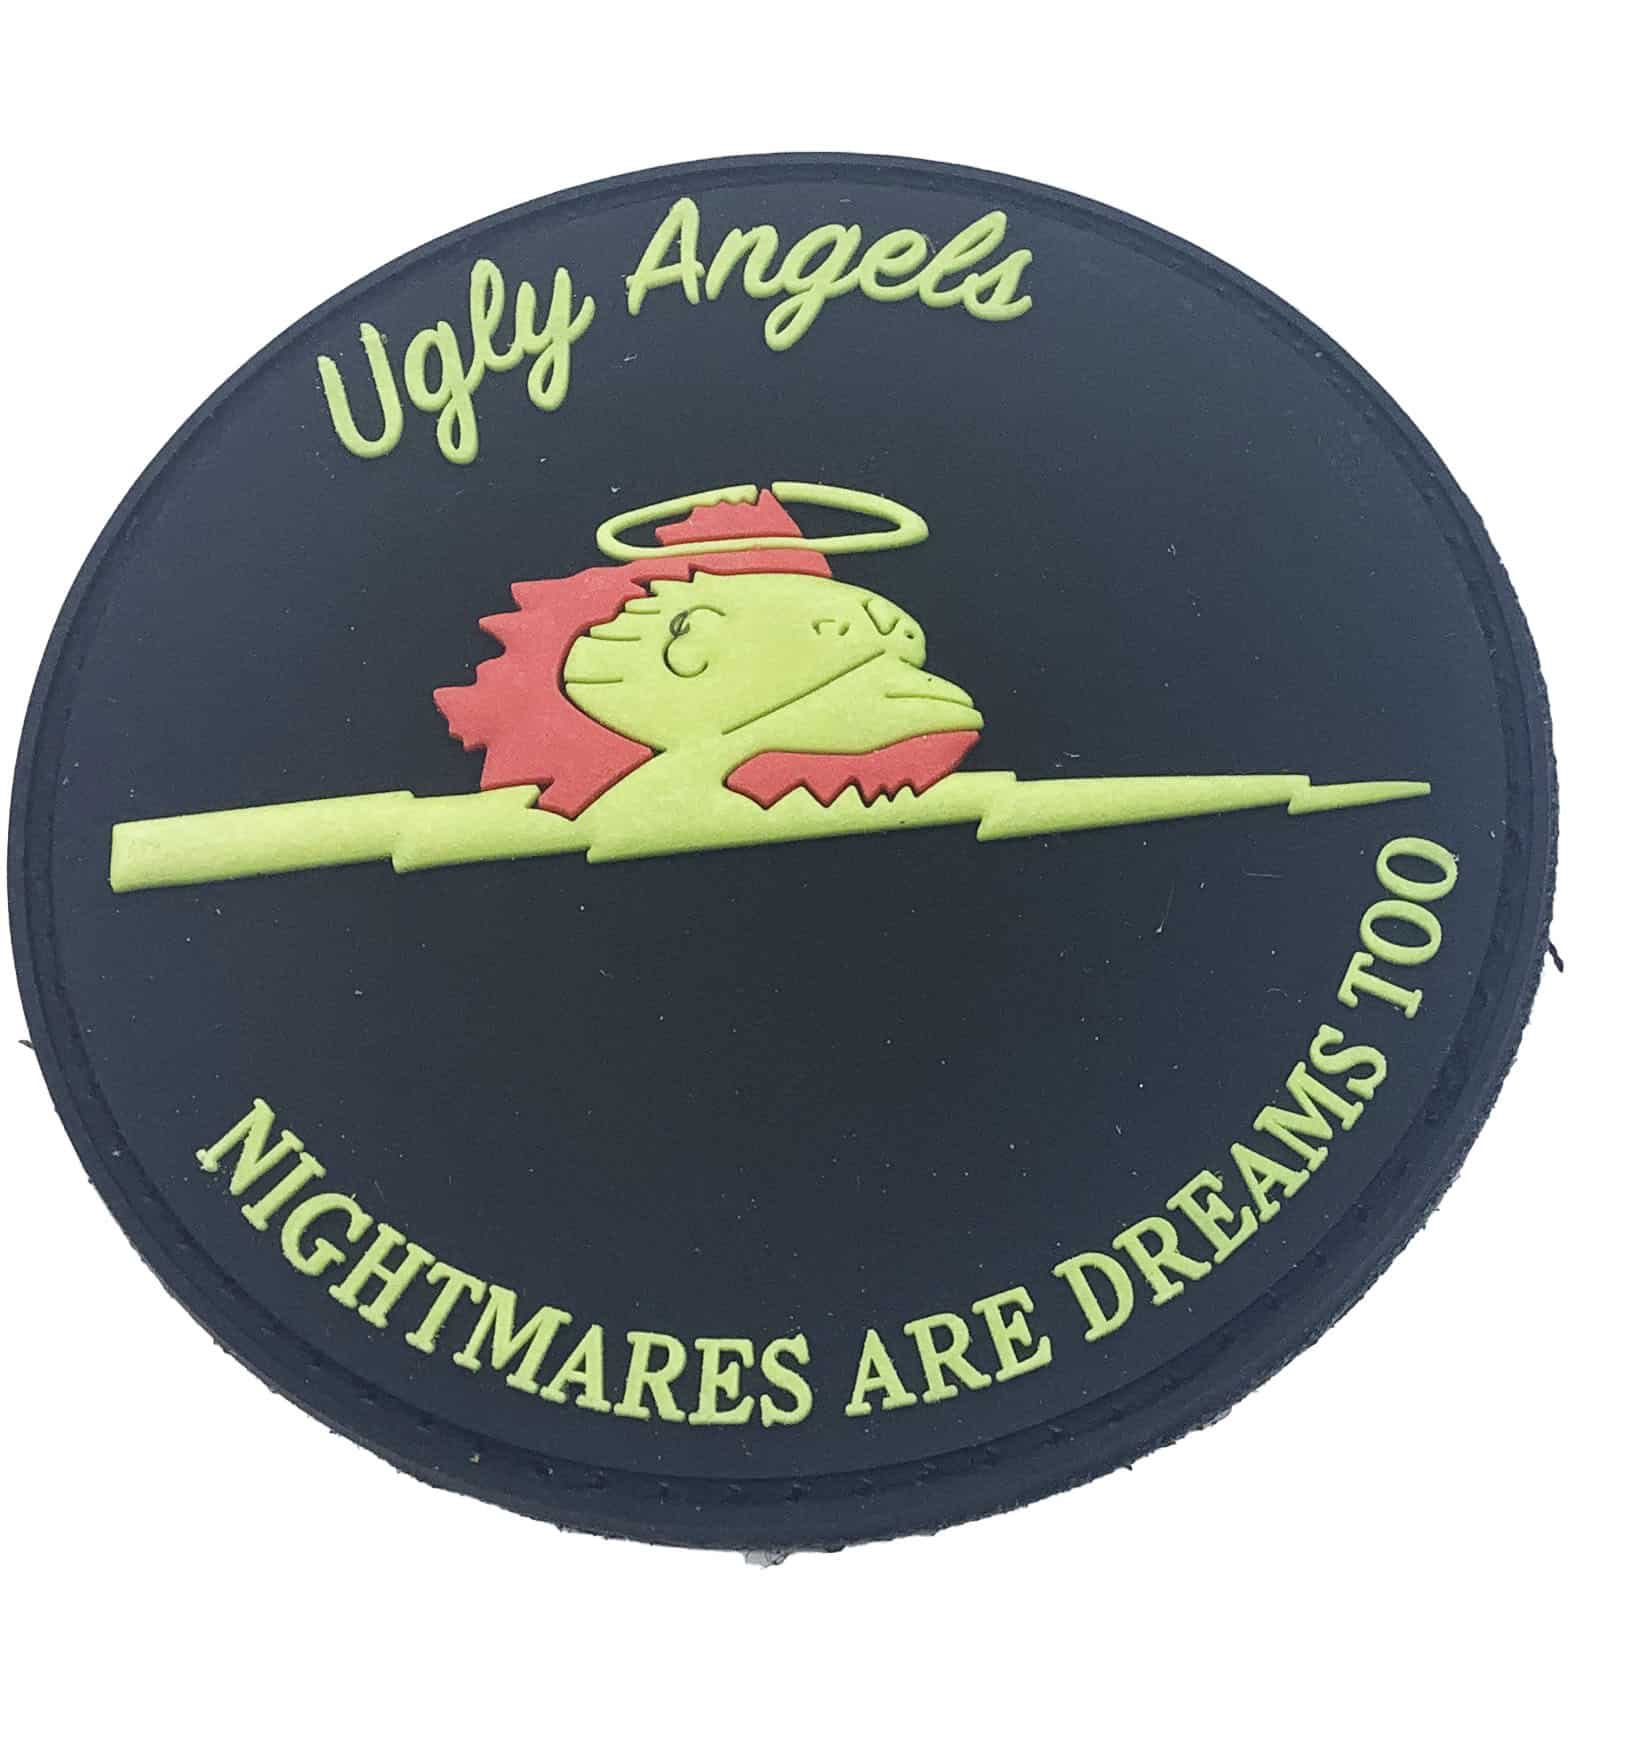 VMM-362 Ugly Angels PVC Patch- with hook and loop